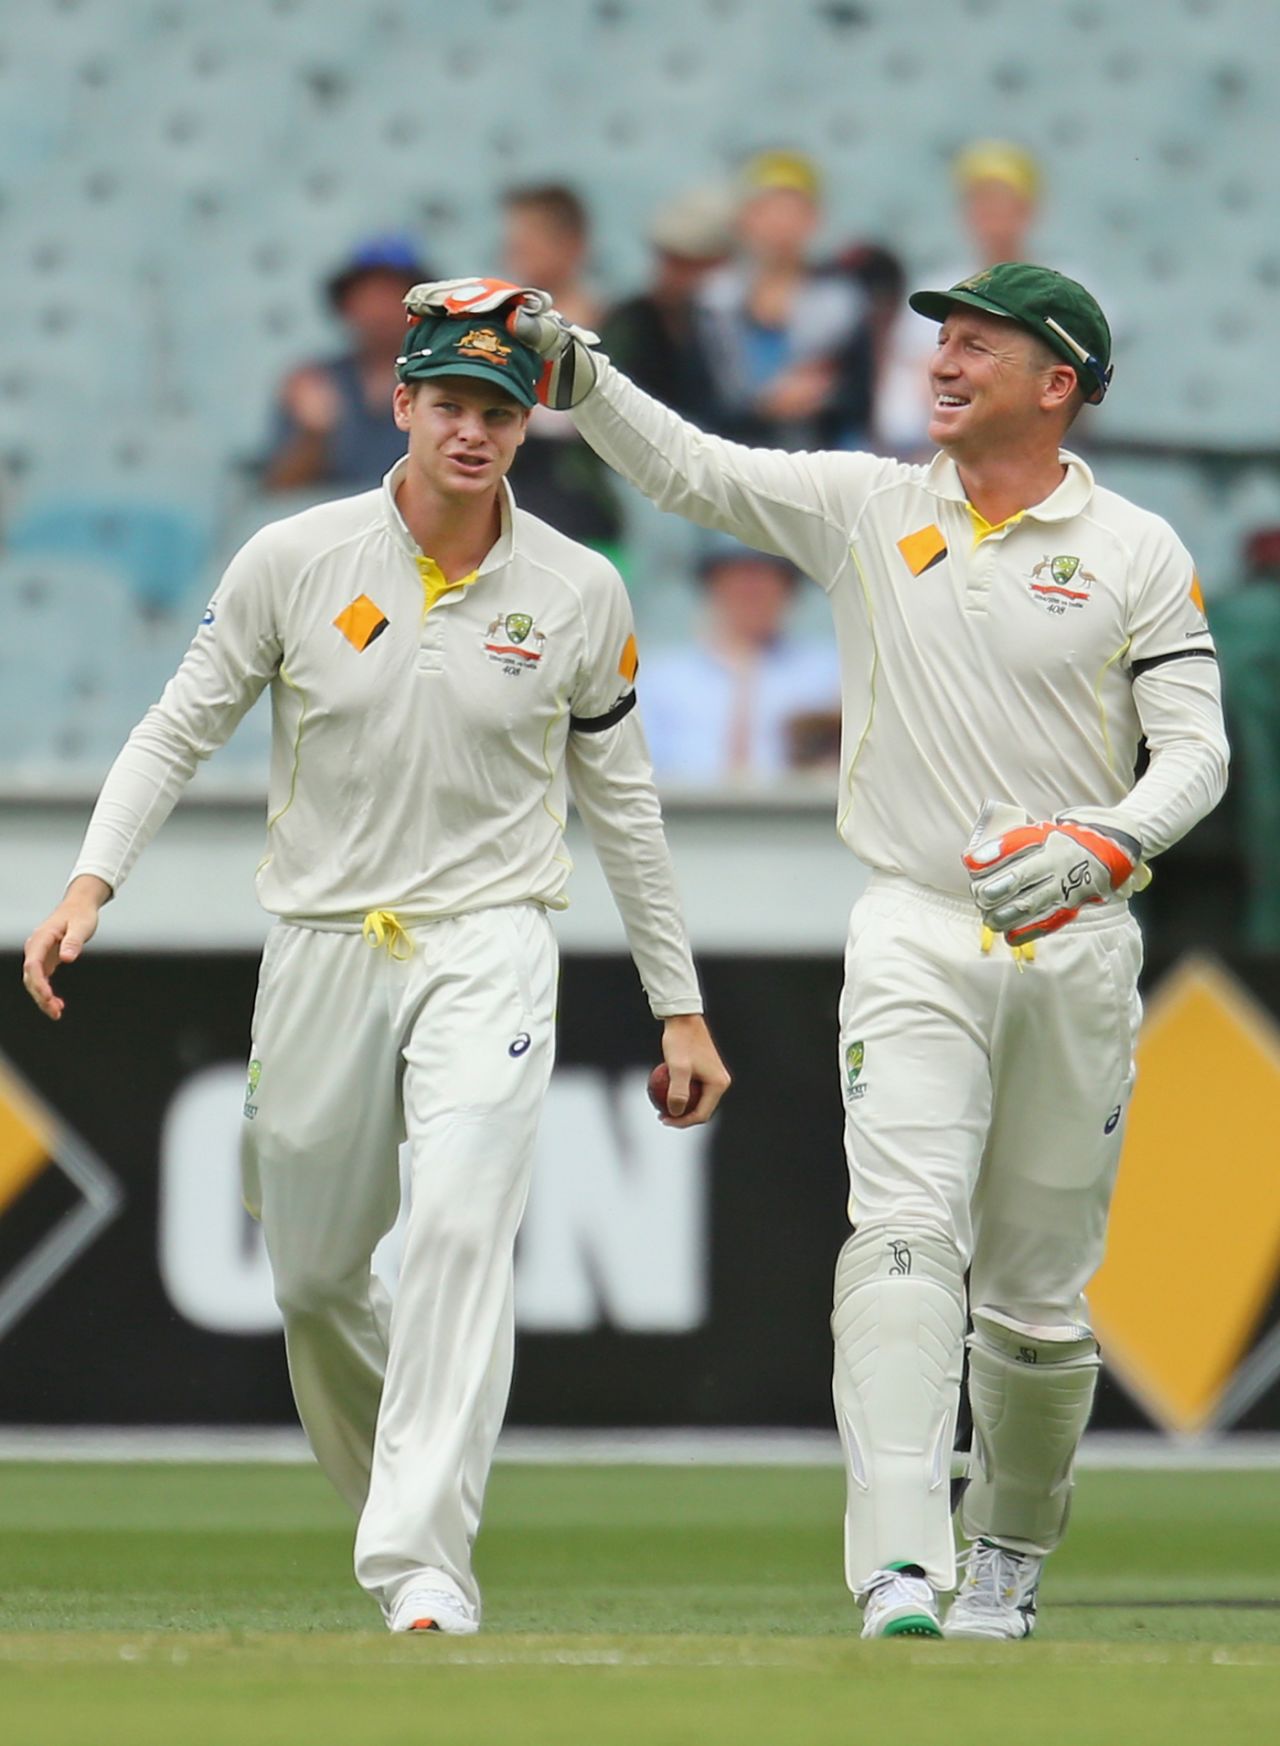 Brad Haddin pats Steven Smith on the head after Smith took a catch to dismiss Mohammed Shami, Australia v India, 3rd Test, Melbourne, day four, December 29, 2014